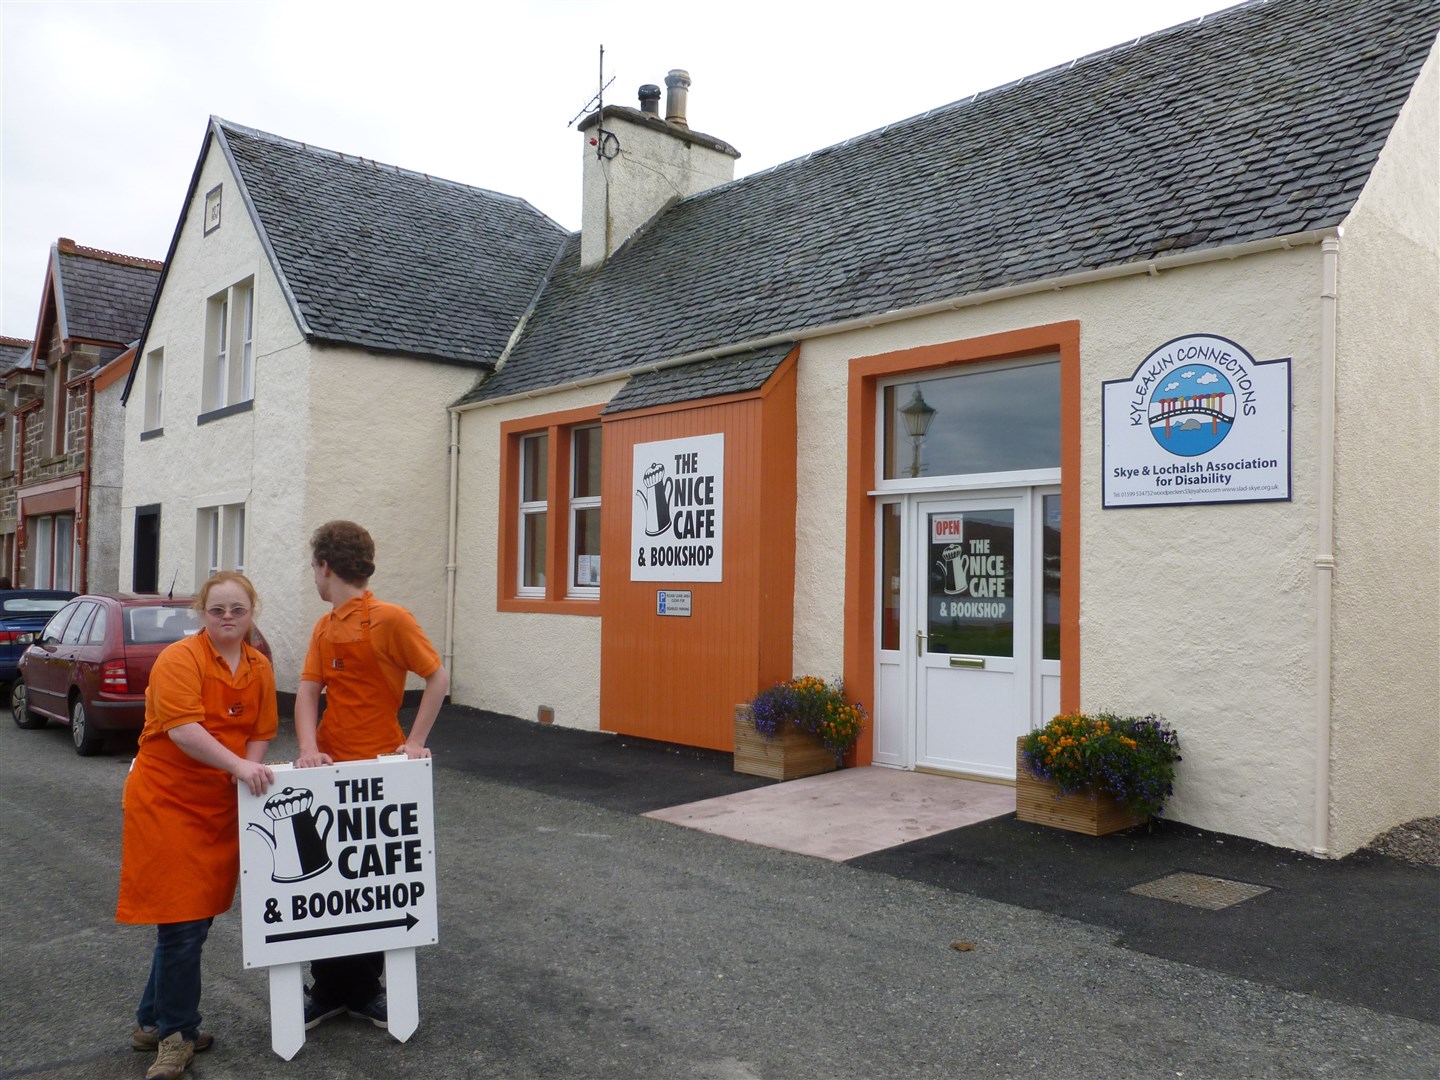 Kyleakin Connections has secured funding to help develop its service, which also benefits people in Lochalsh.